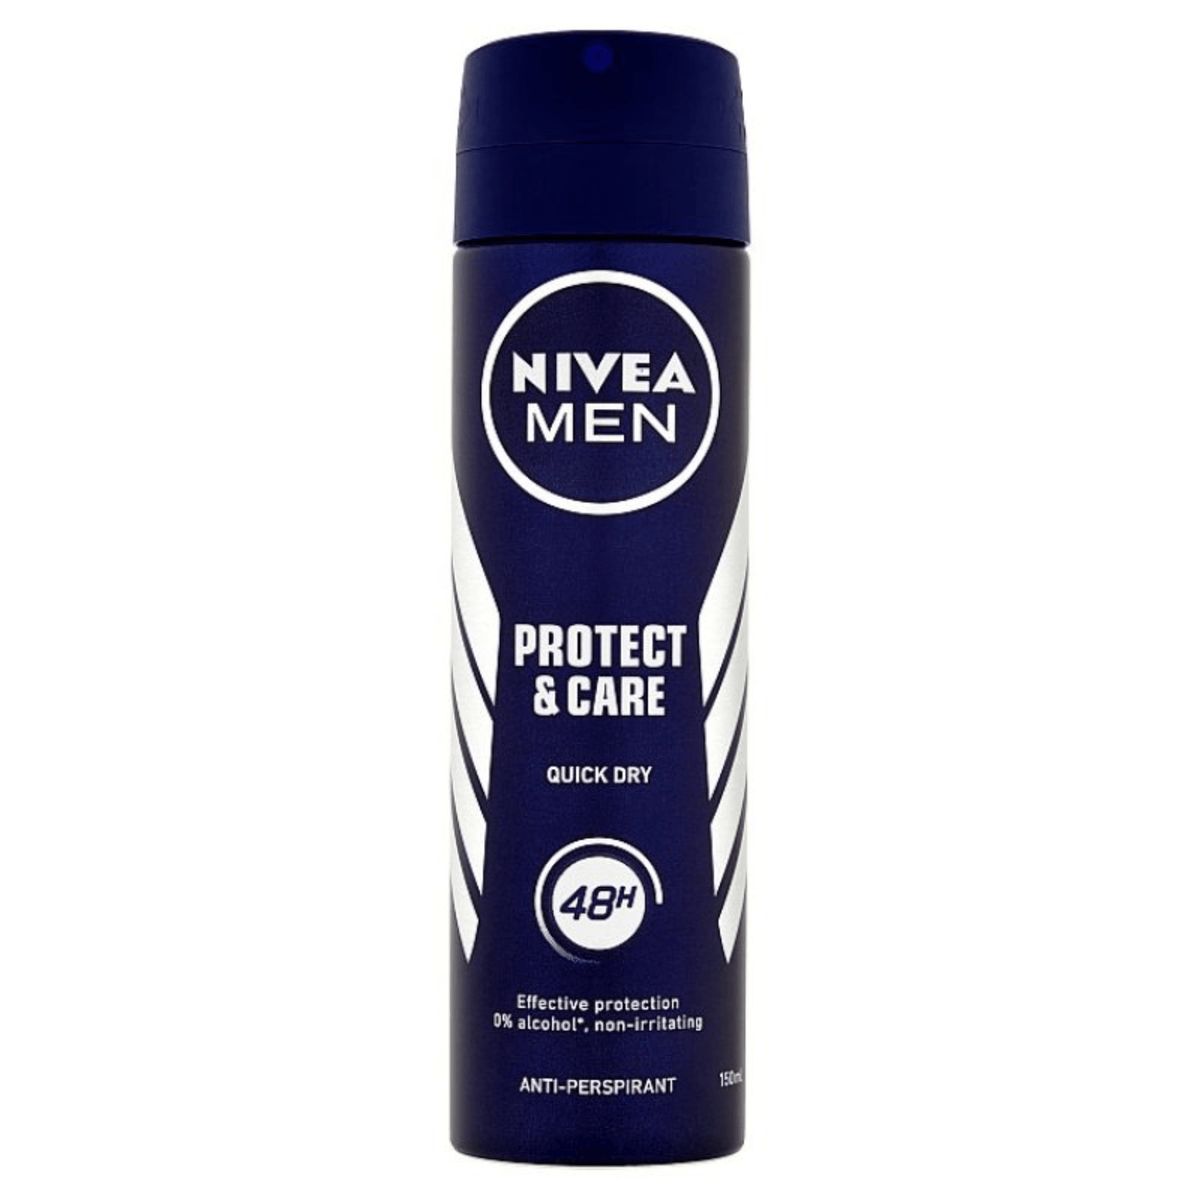 Primary Images of Protect & Care Spray Deo